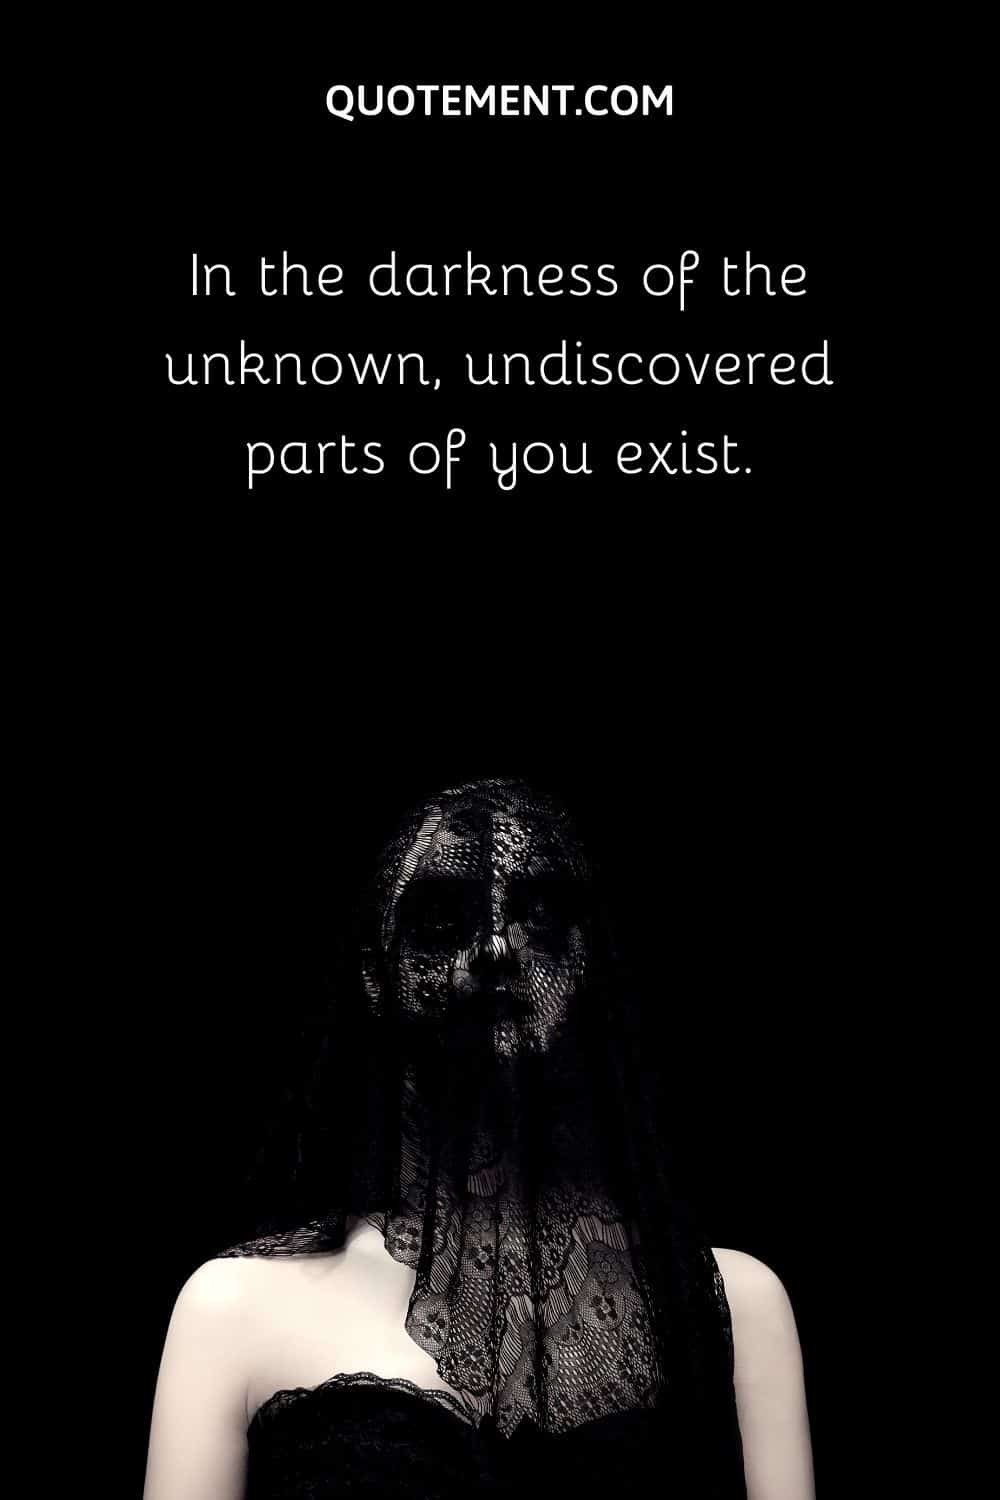 In the darkness of the unknown